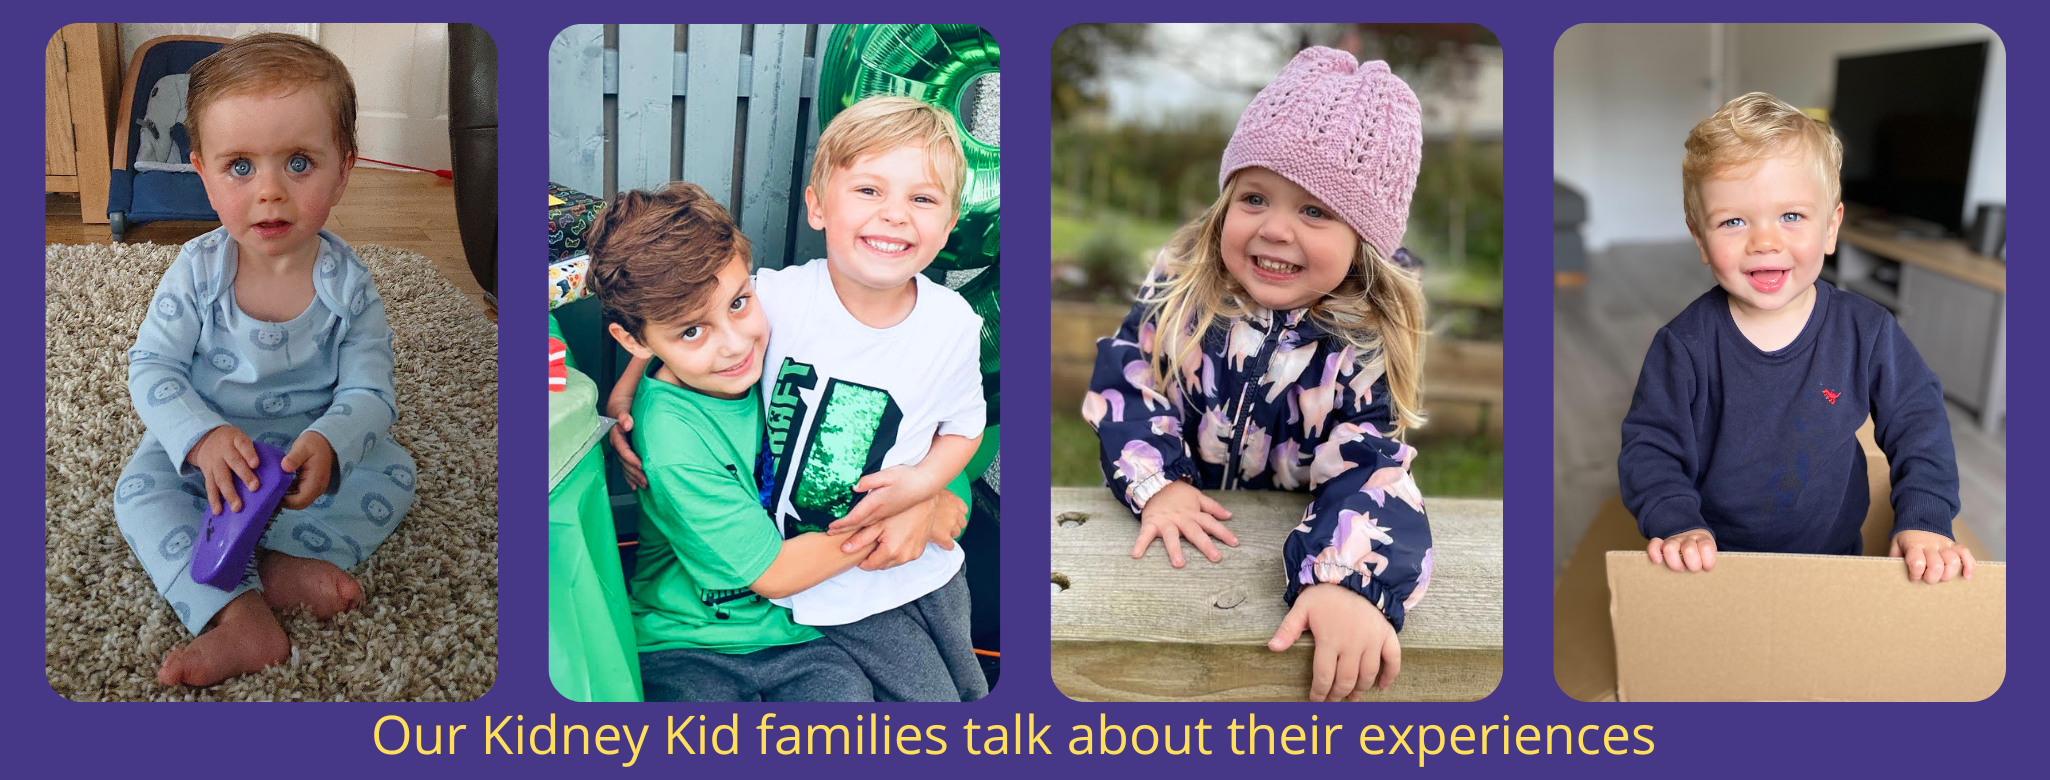 Our Kidney Kids families talk about their experiences